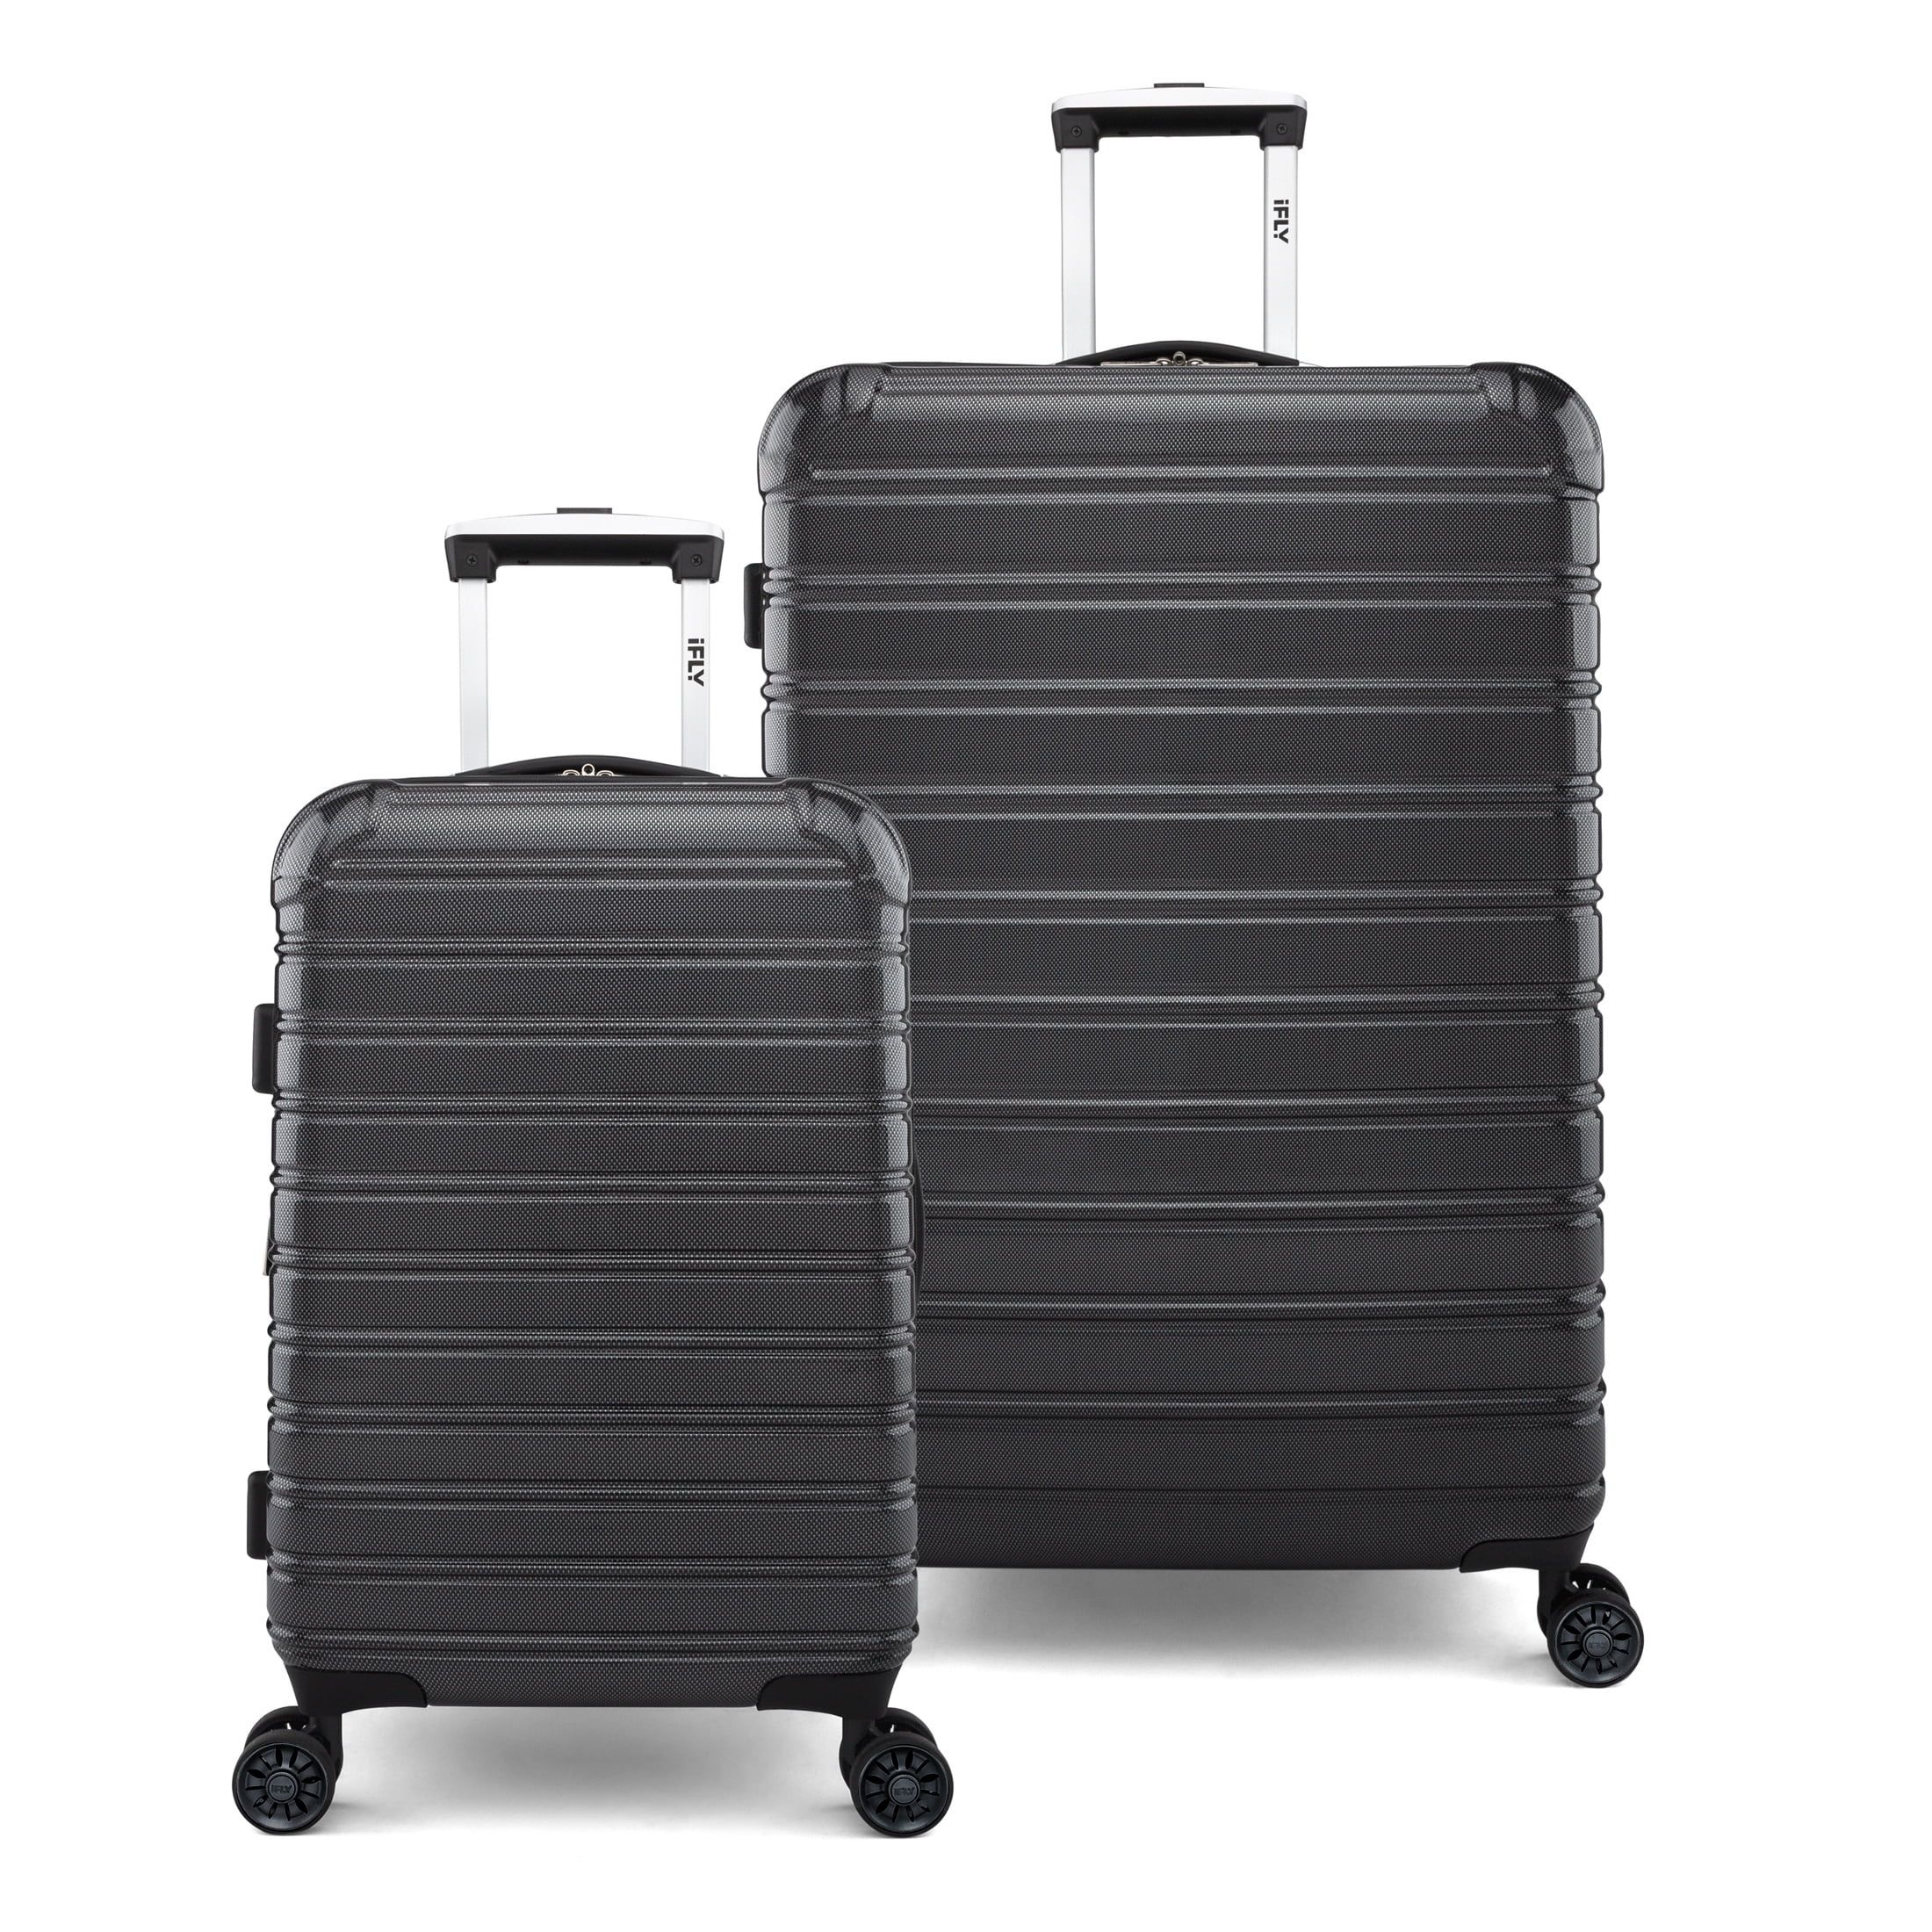 iFLY Hardside Luggage Fibertech 2 Piece Set, 20-inch Carry-on and 28-inch Checked Luggage, Black ... | Walmart (US)